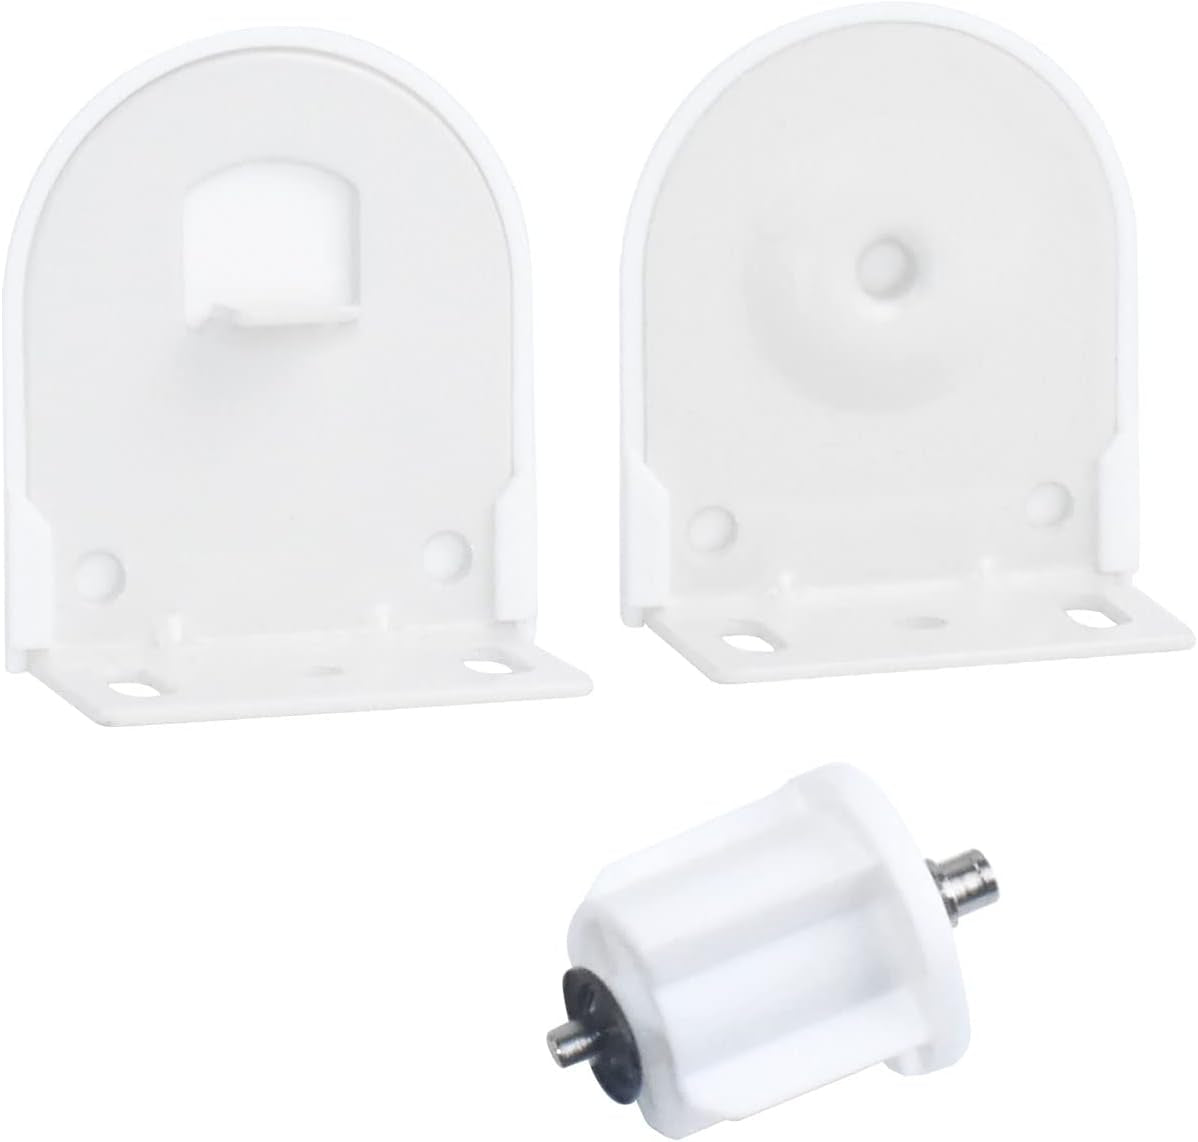 1-1/8" Roller Blind Repair/Hardware Kit, Replacement Brackets Parts, Window Blind Parts Accessories Working with 28Mm round Roller Shade Tubes, 1 Pair, White